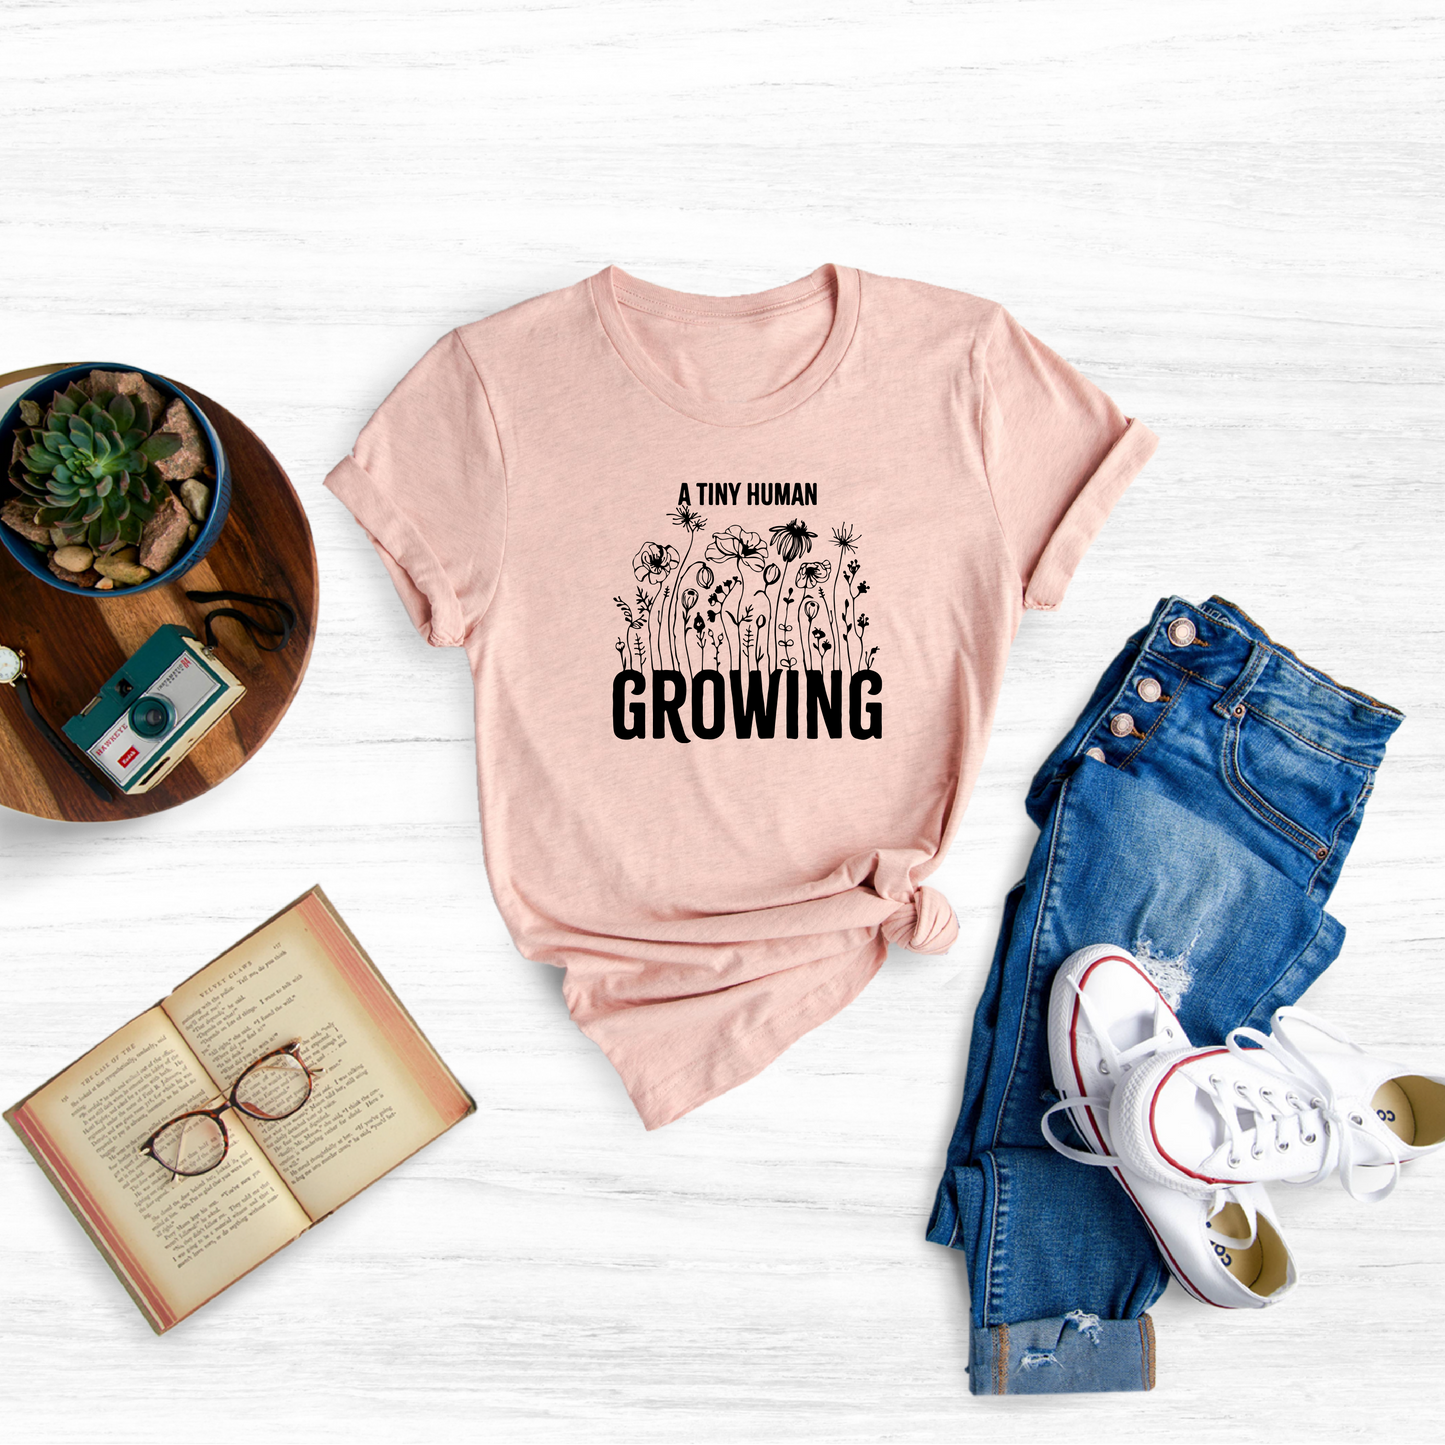 Embrace the Joys of Motherhood with a Funny and Adorable Maternity T-Shirt